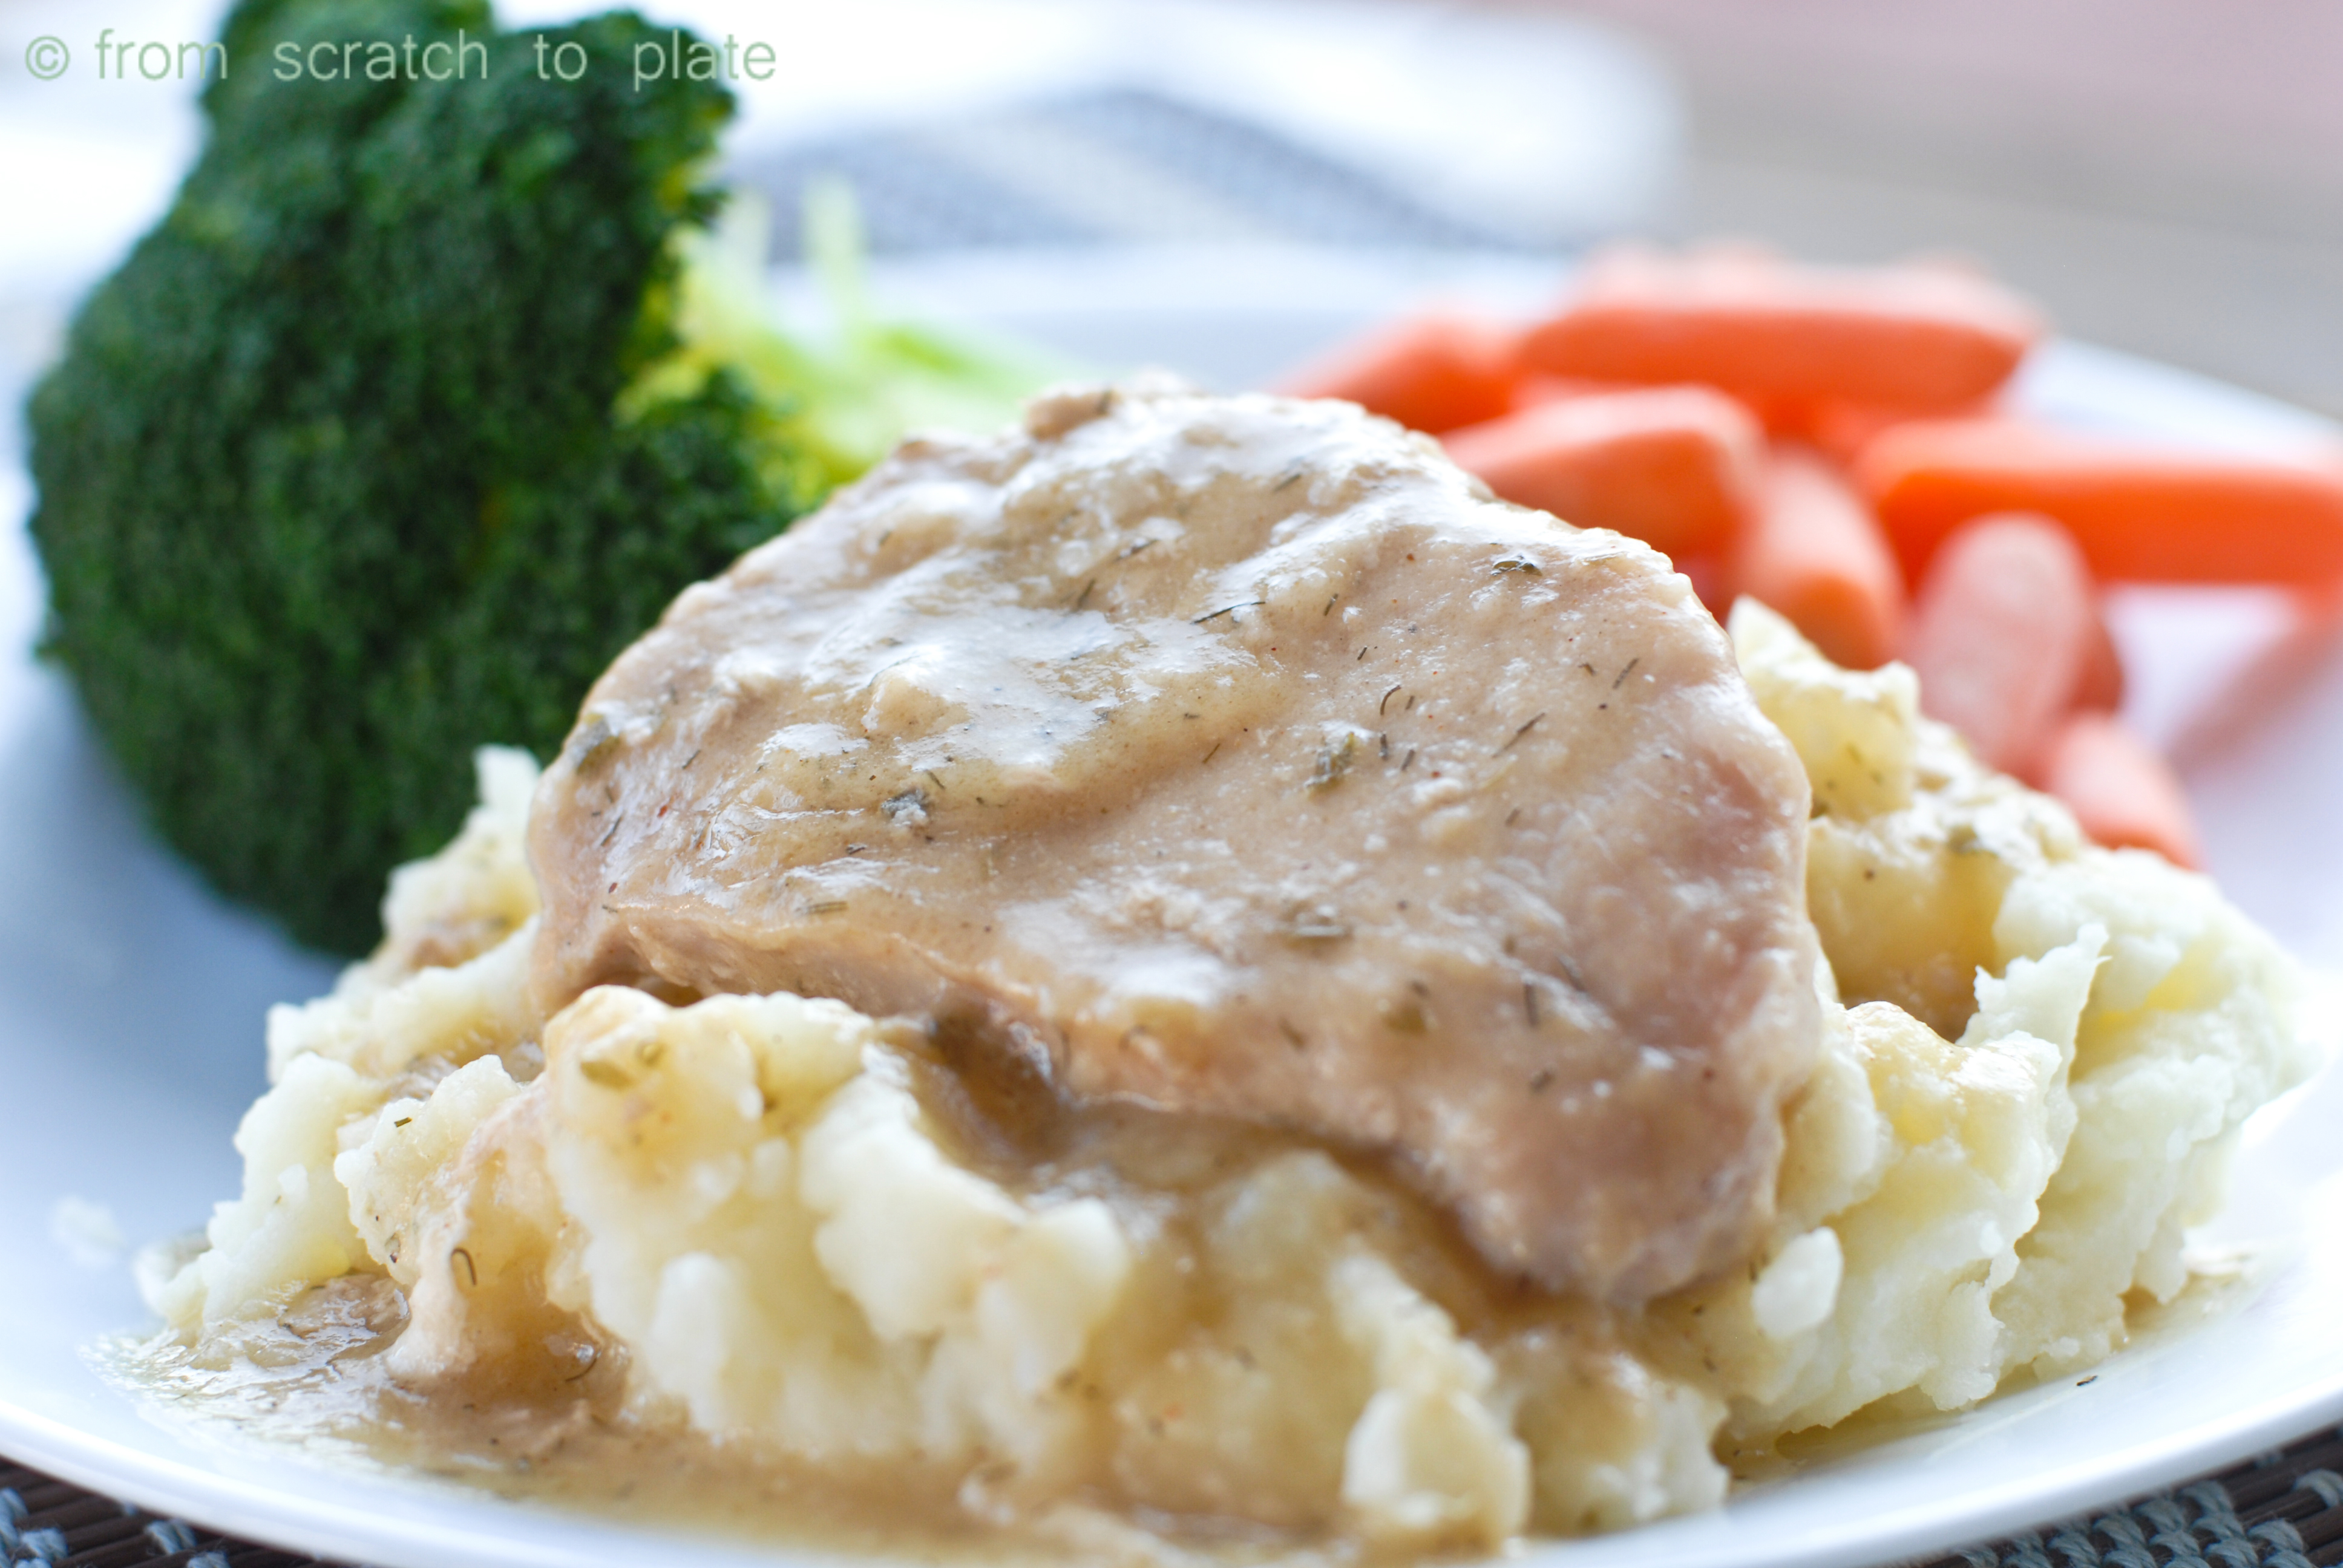 What is the best recipe for slow cooker pork chops?